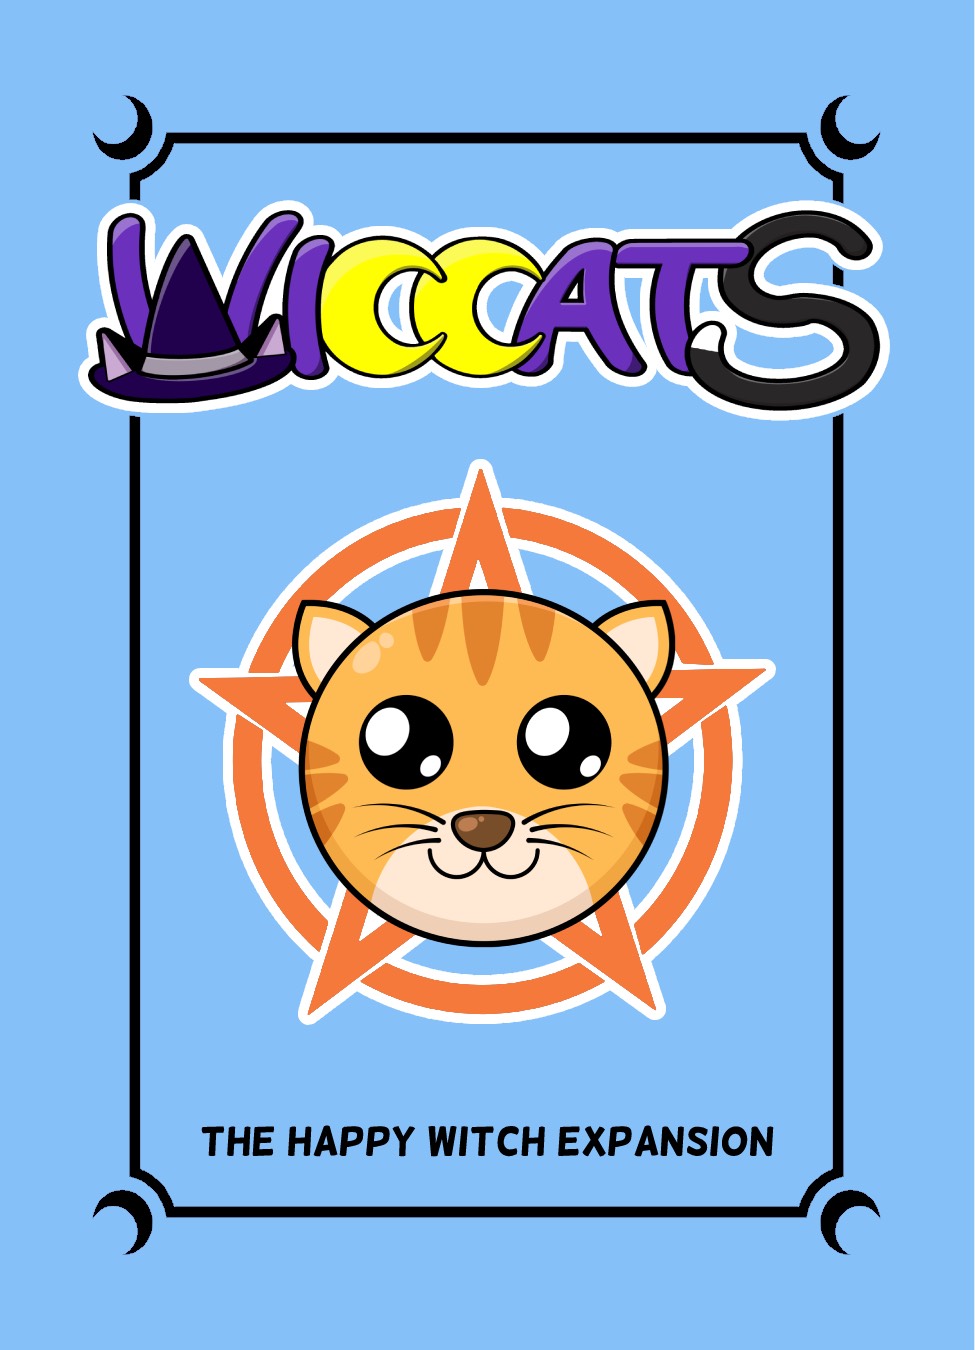 Wiccats Happy Witch